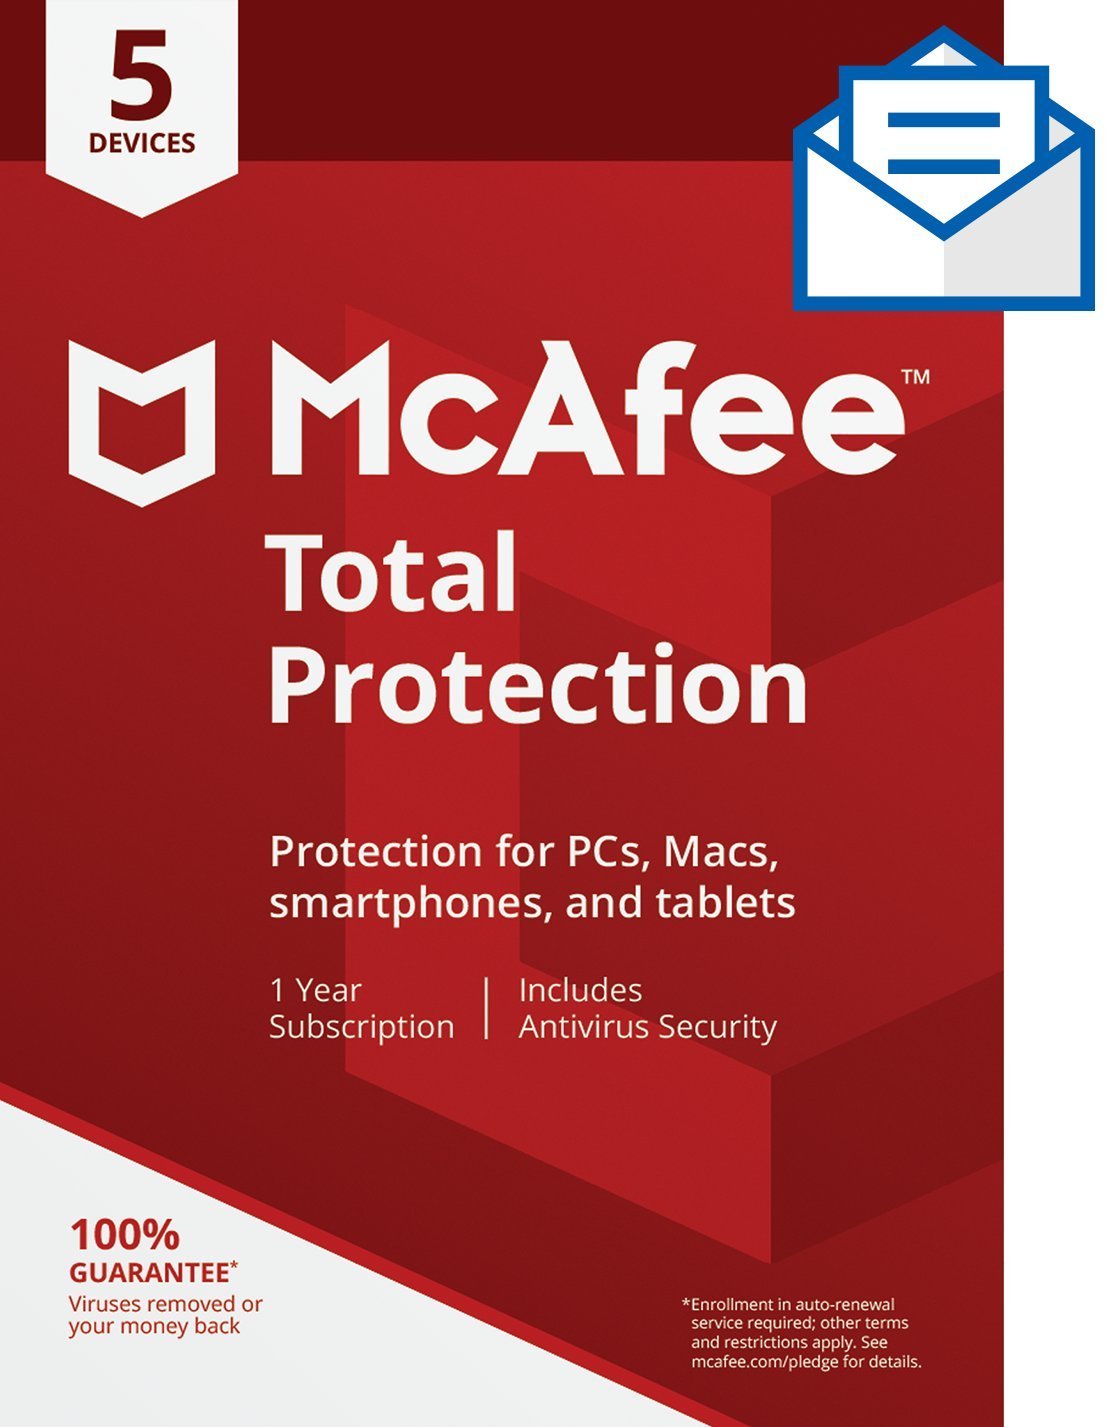 mcafee total protection 5 devices